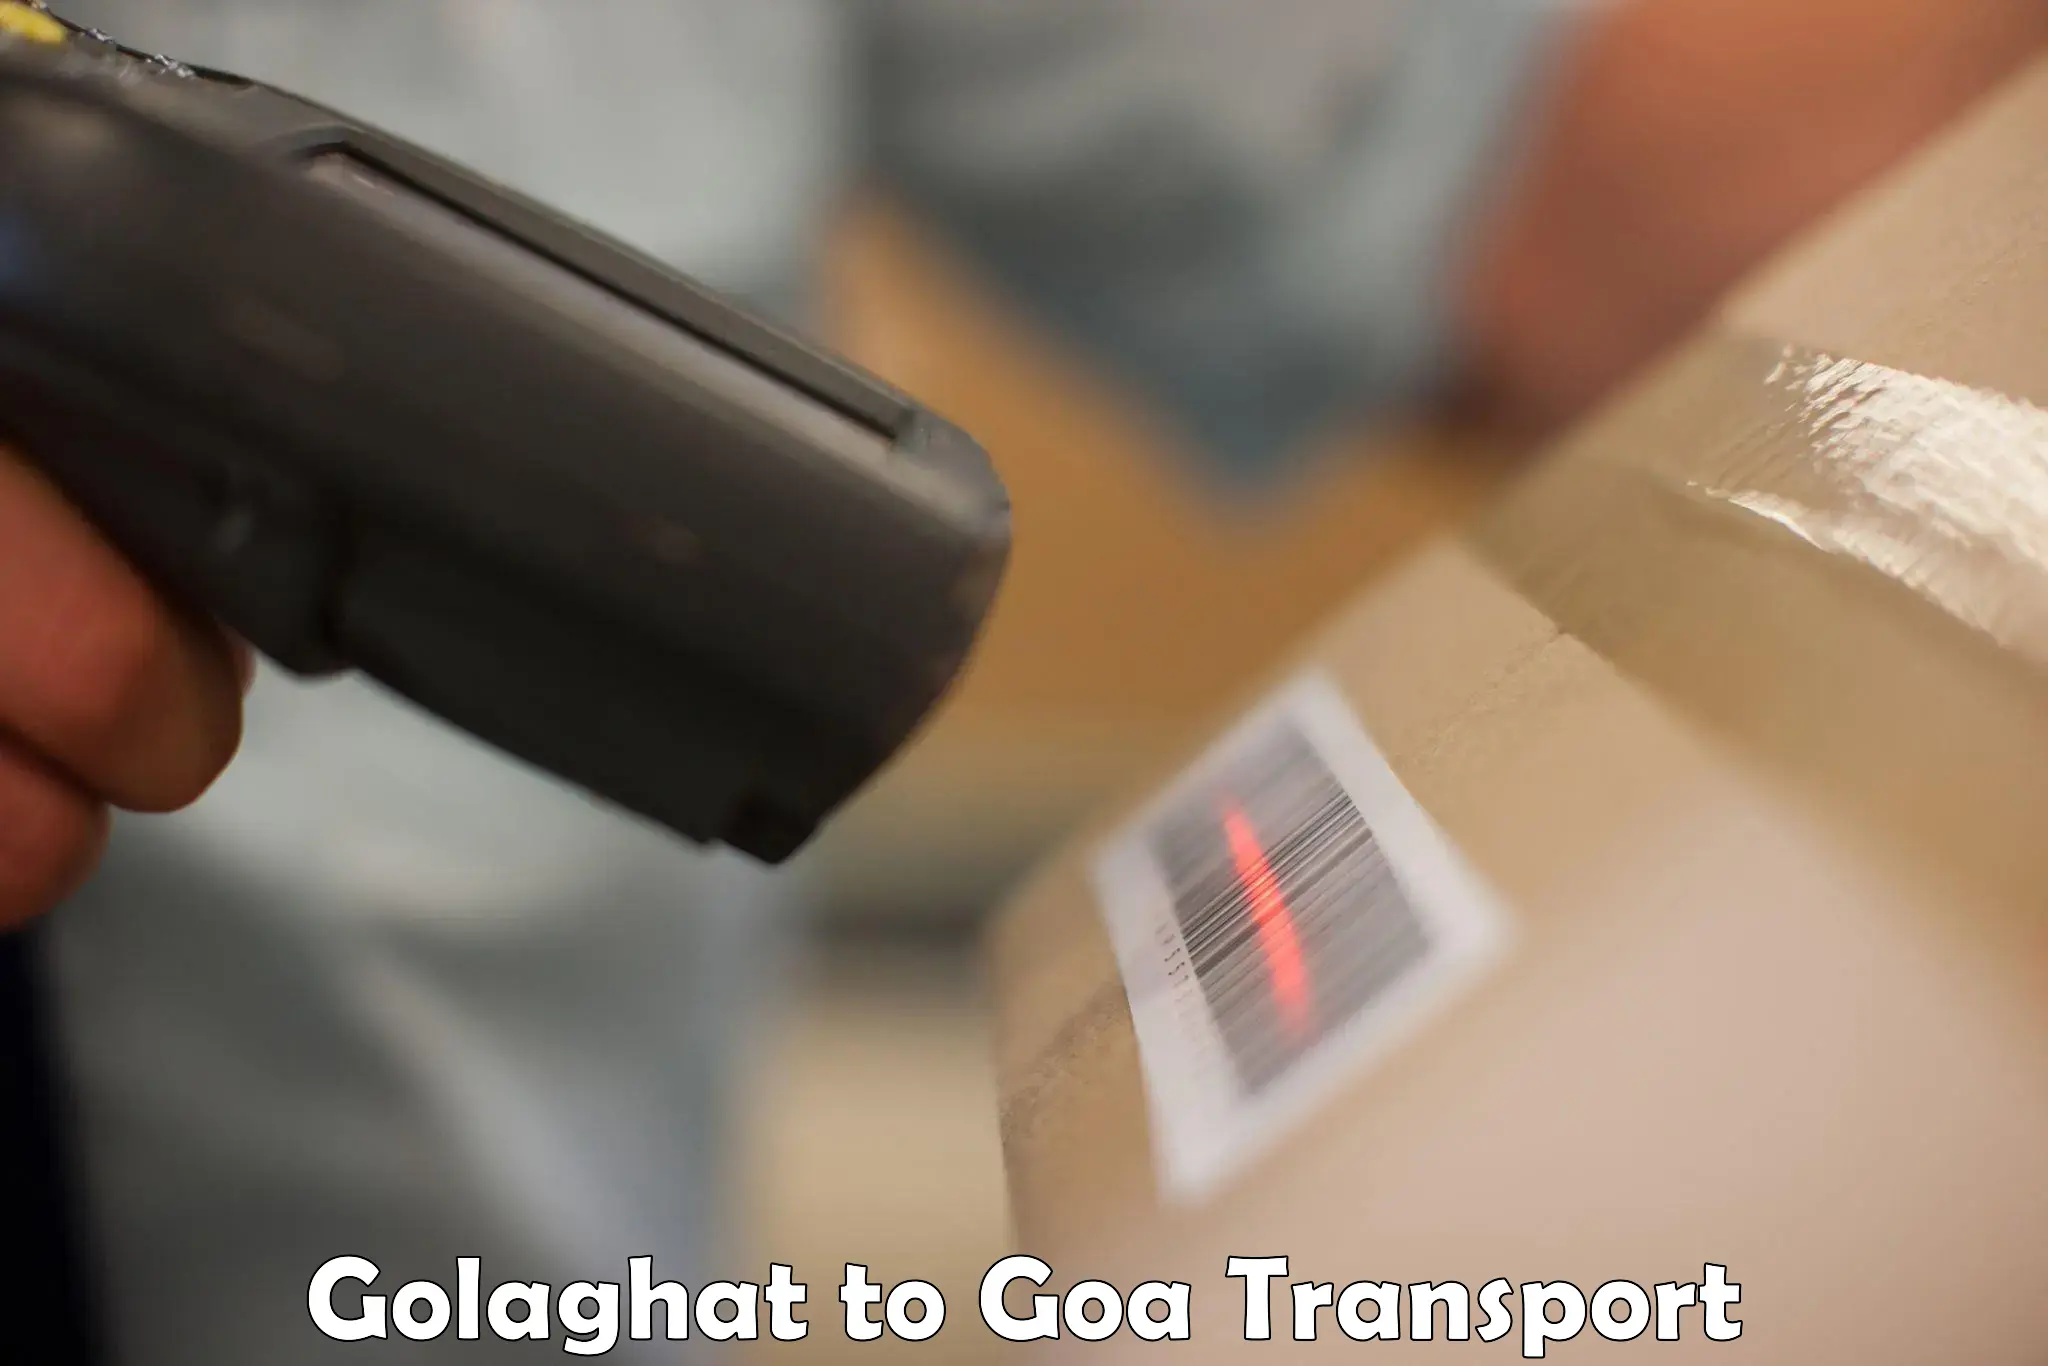 Delivery service Golaghat to Mormugao Port